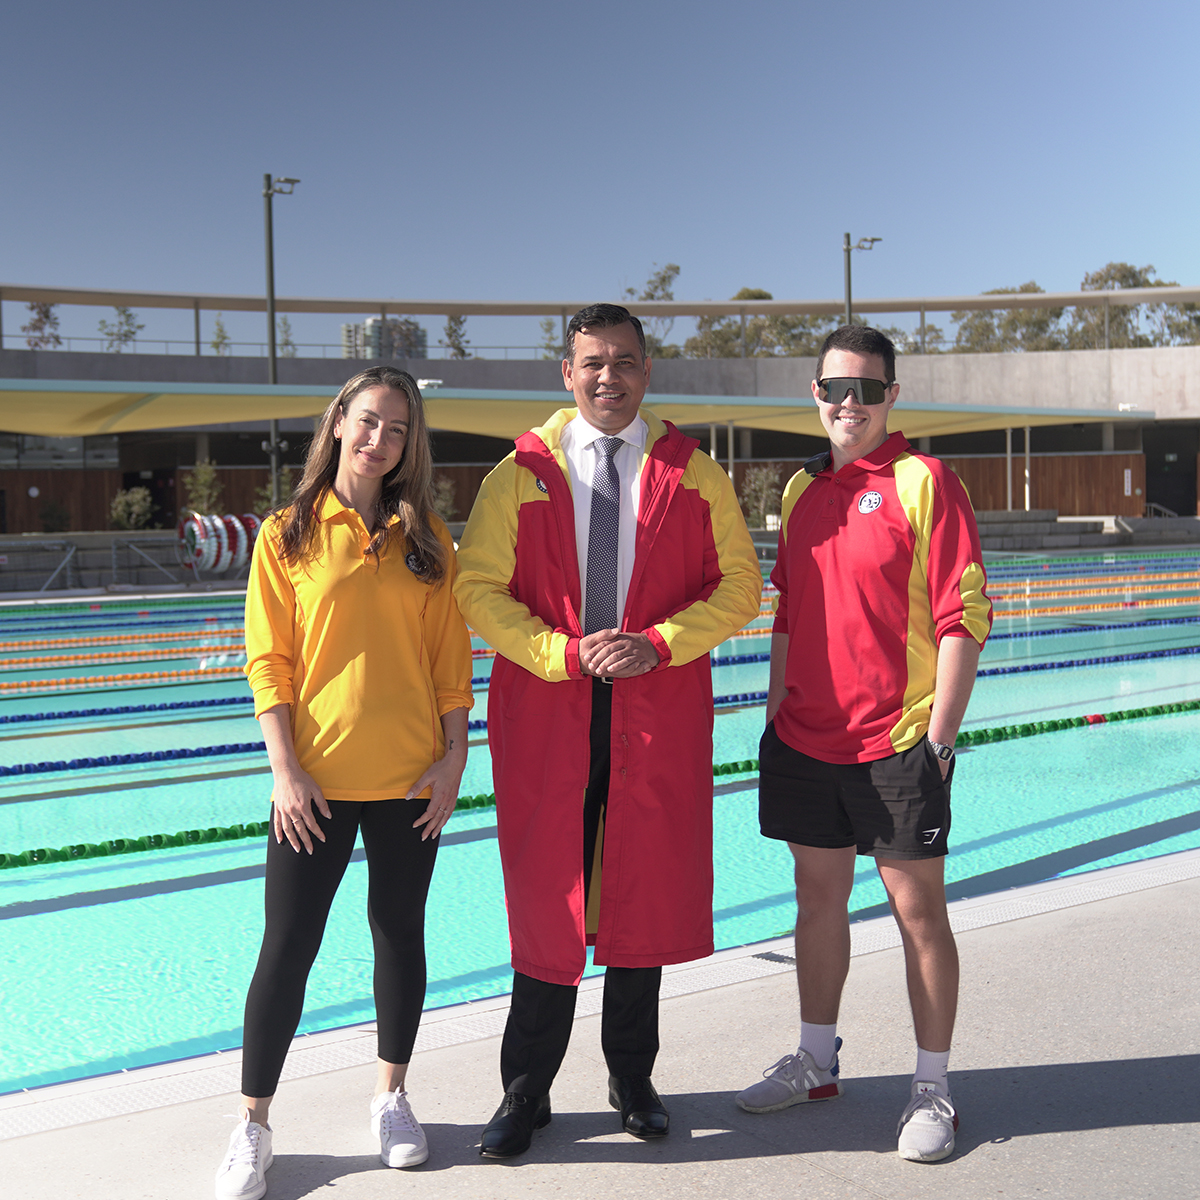 Mark your calendars! The brand new Parramatta Aquatic Centre is set to open its doors on Monday, September 25th at 2pm. Get ready to cool off or break a sweat in style! cityofparramatta.co/3L7chA6